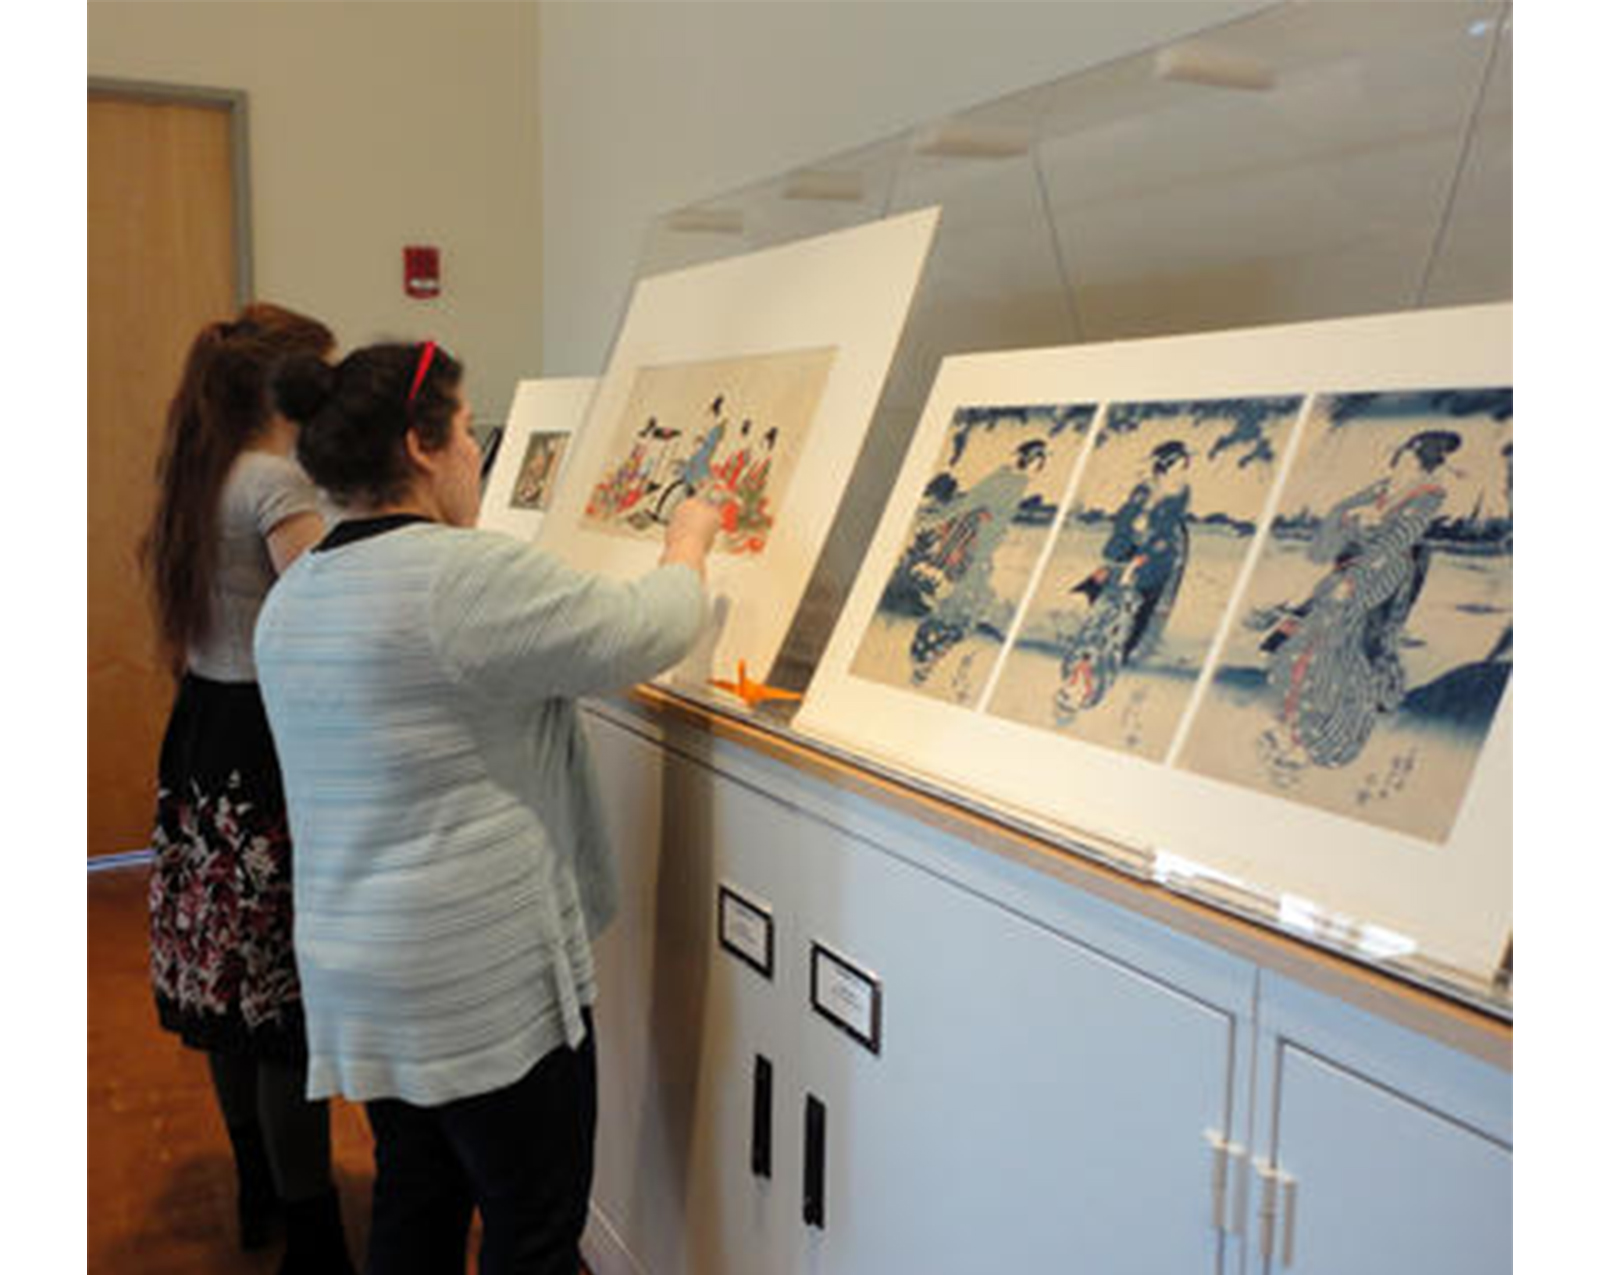 two girls stand in front of prints propped up on a gray cabinet, examining the prints closely and pointing to them